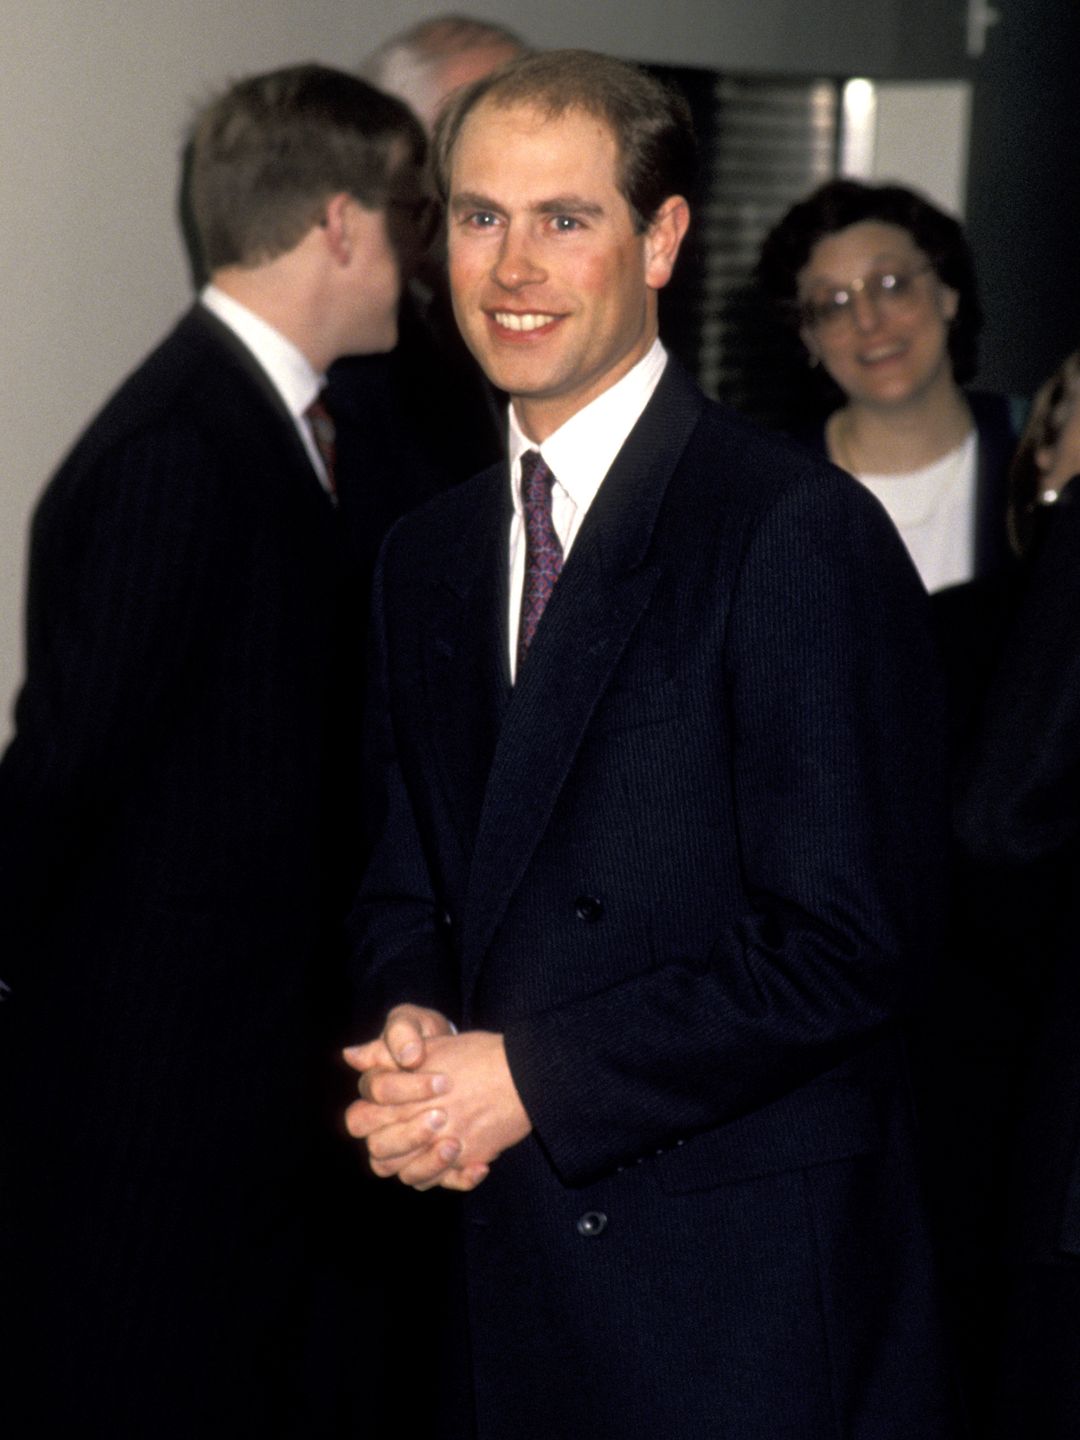 Prince Edward in a suit